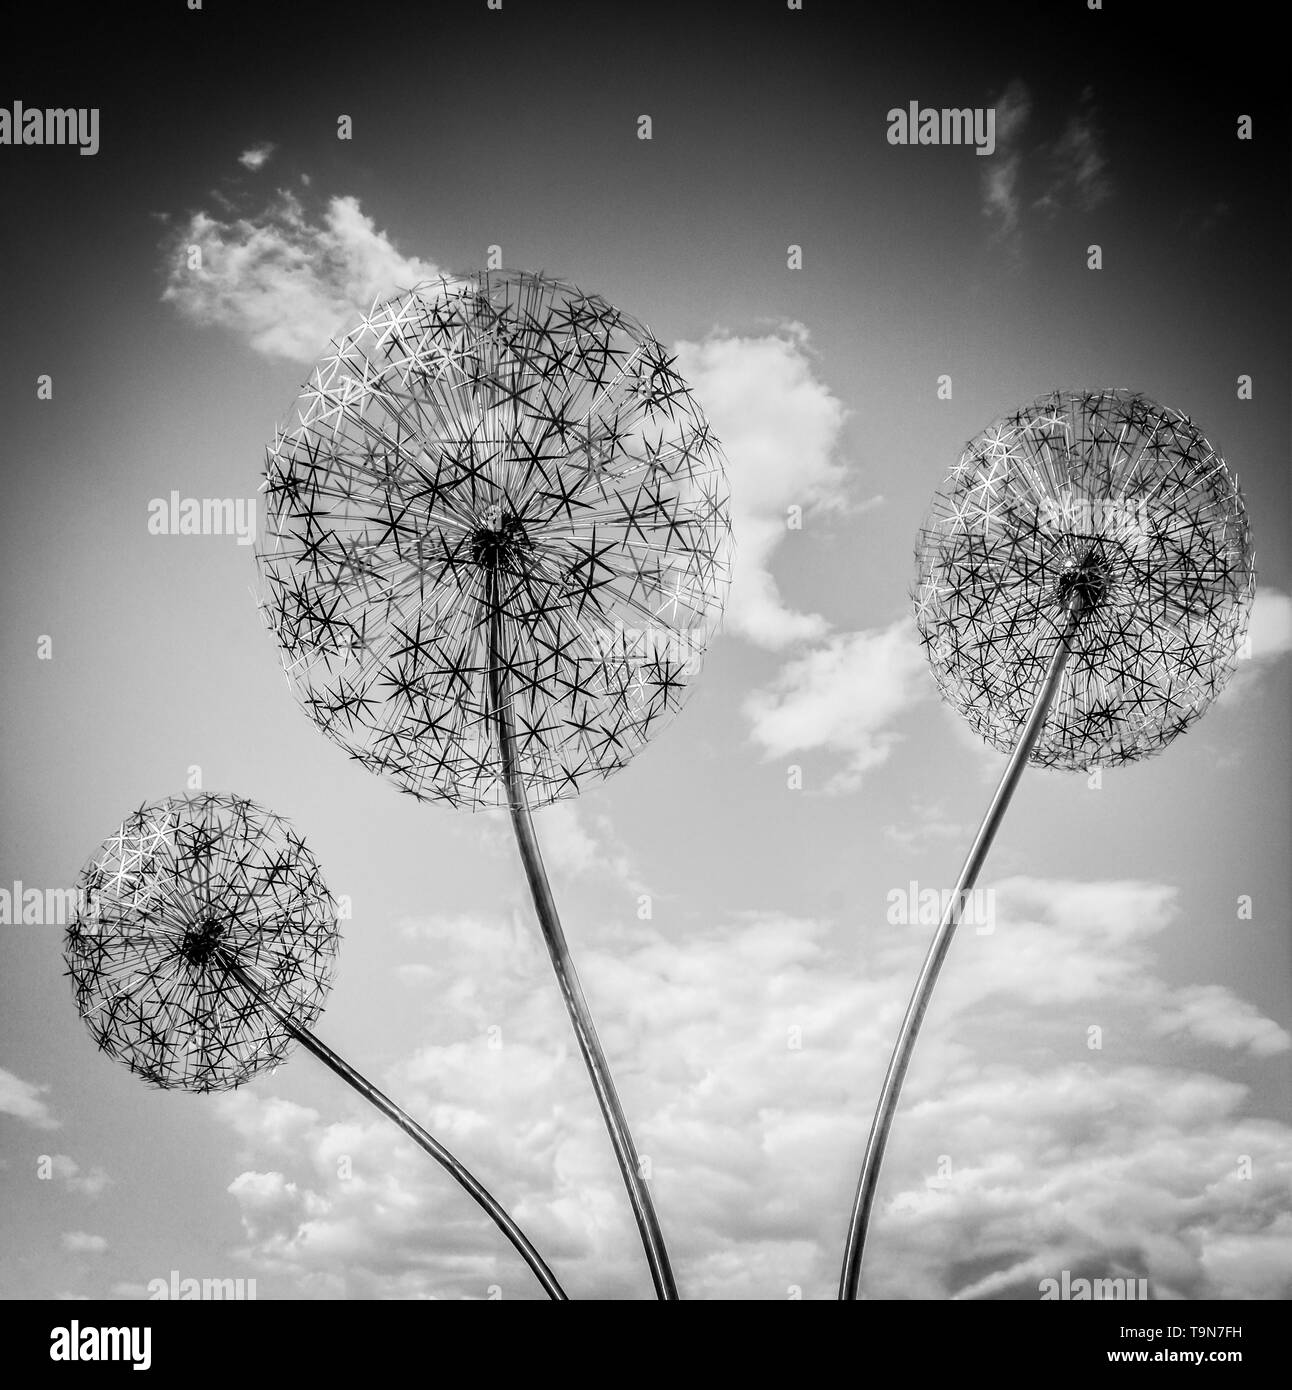 A skyward view of three Amazing Stainless steel Dandelions isolated and rising up to the clouds for an imaginative concept in black and white Stock Photo